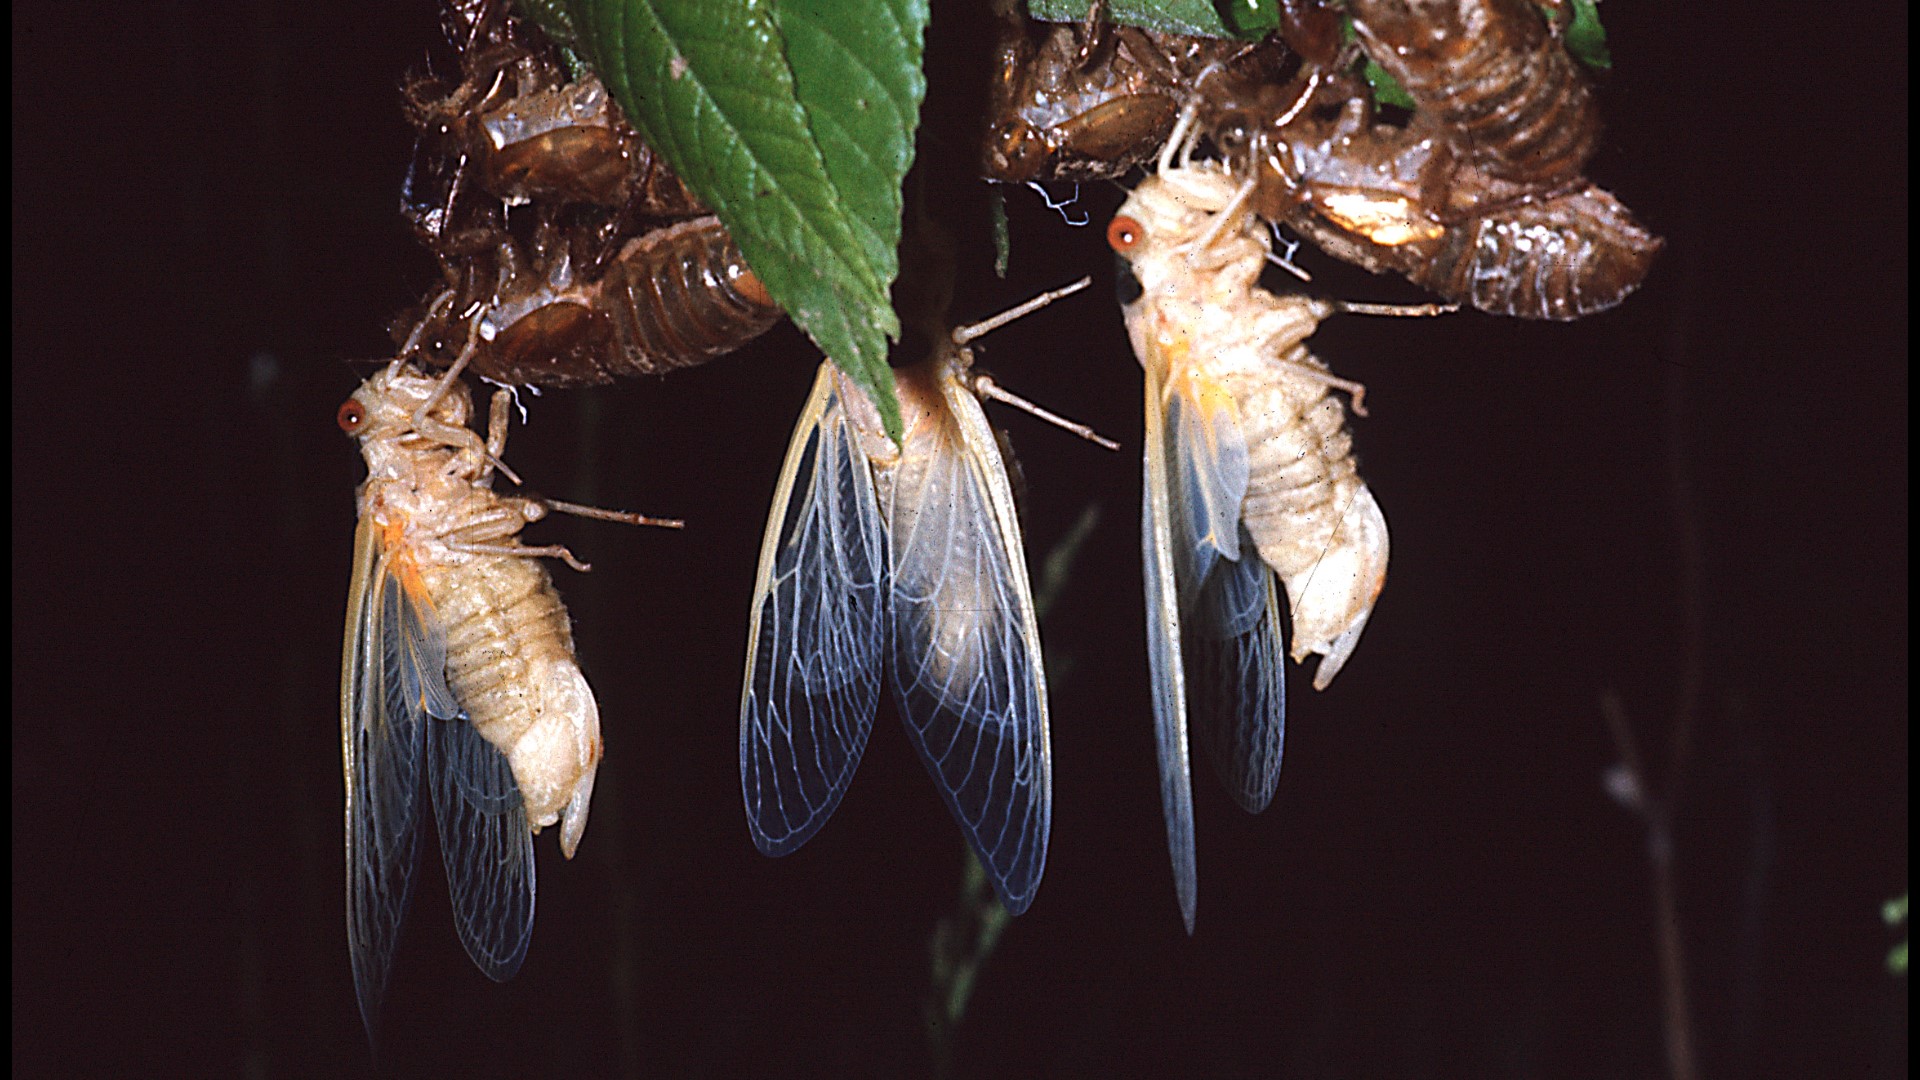 The thought of billions of cicadas emerging this spring is leaving communities overwhelmed.